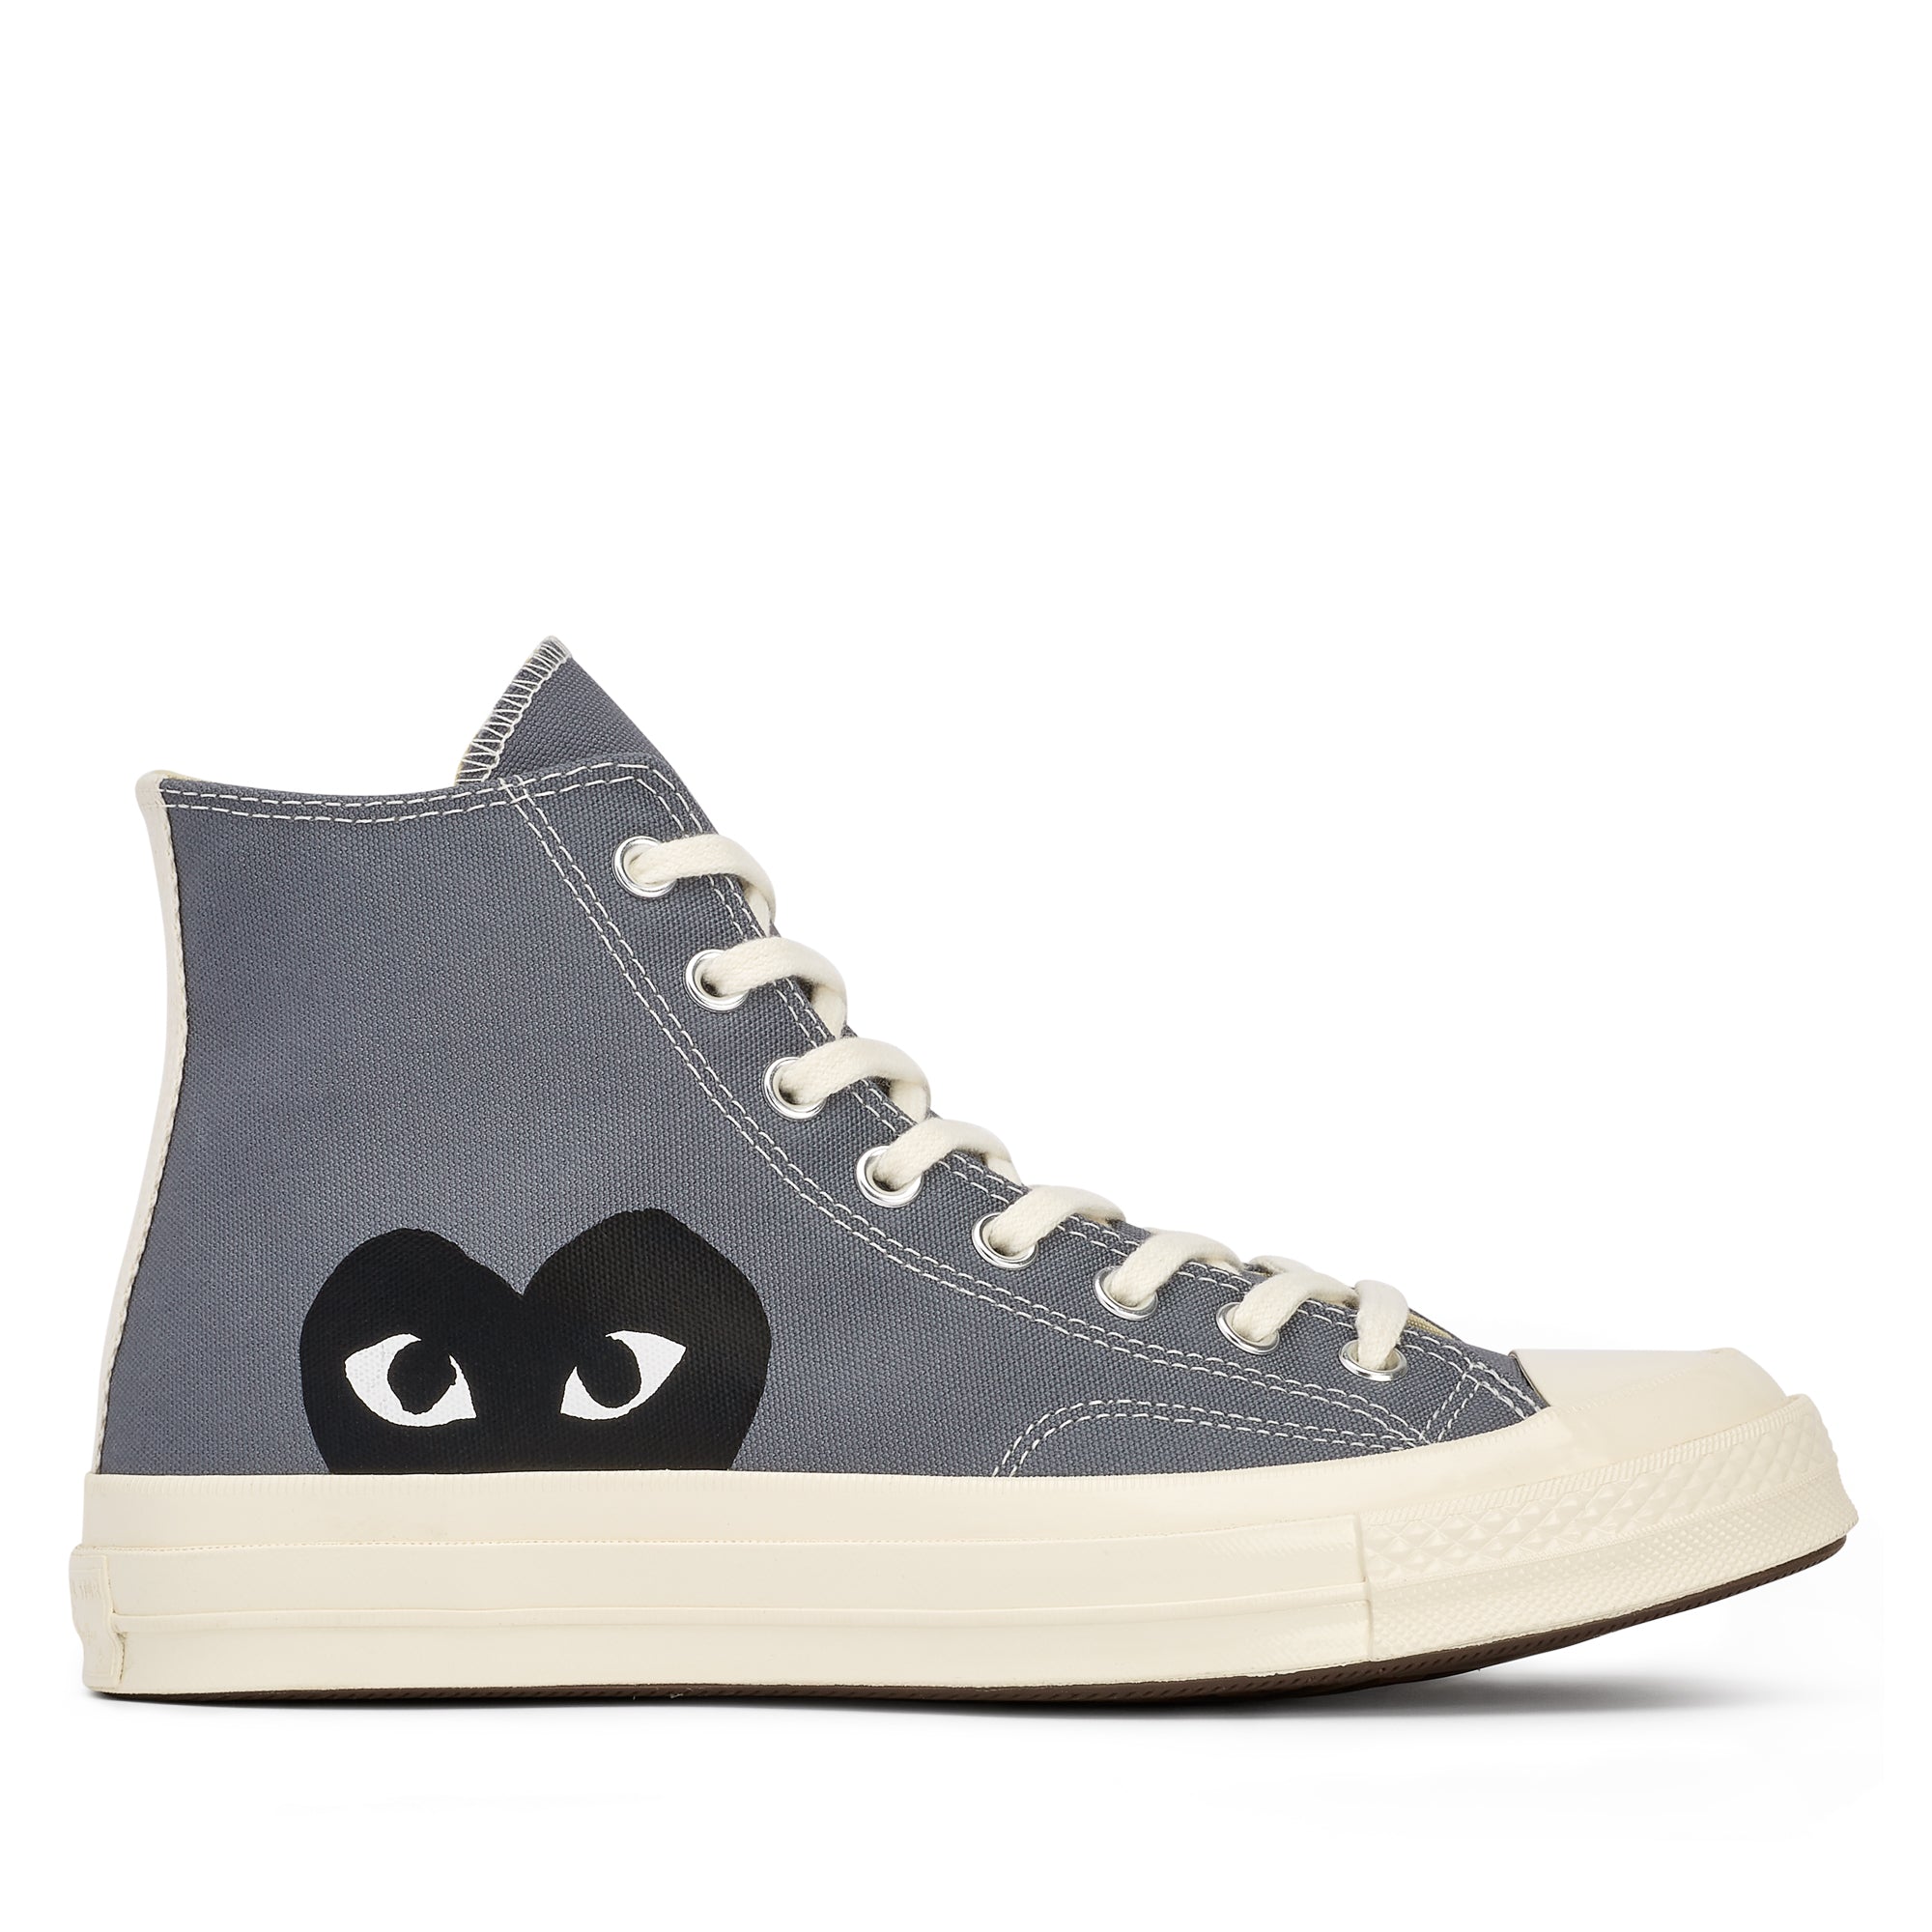 Play Converse - Black Heart Chuck Taylor All Star ’70 High Sneakers - (Grey) view 1